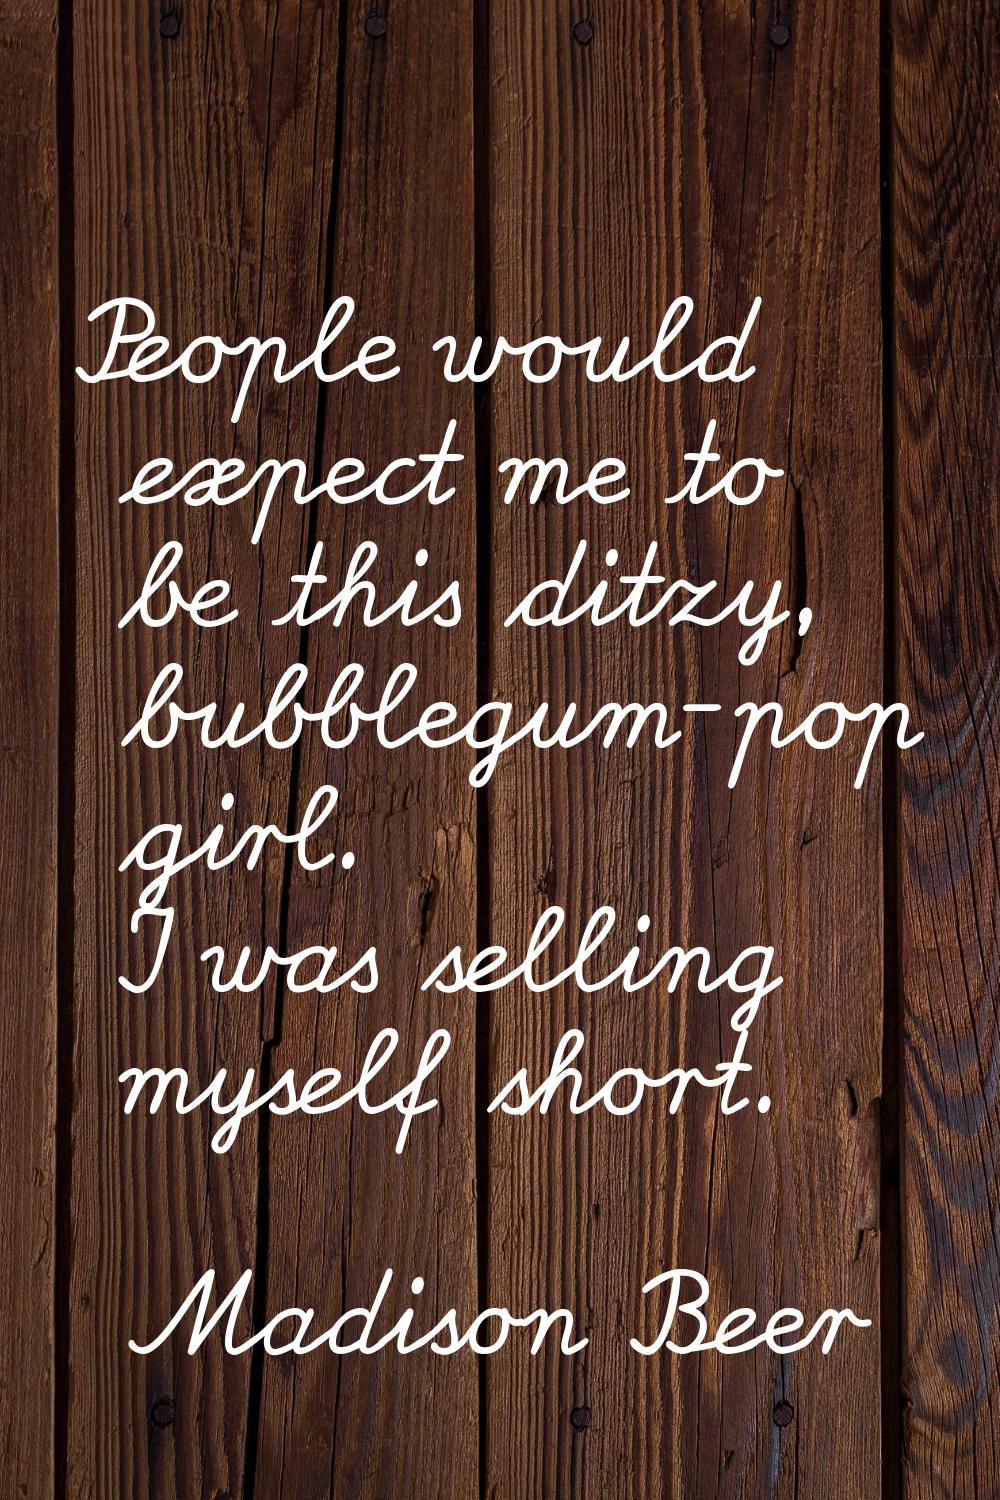 People would expect me to be this ditzy, bubblegum-pop girl. I was selling myself short.